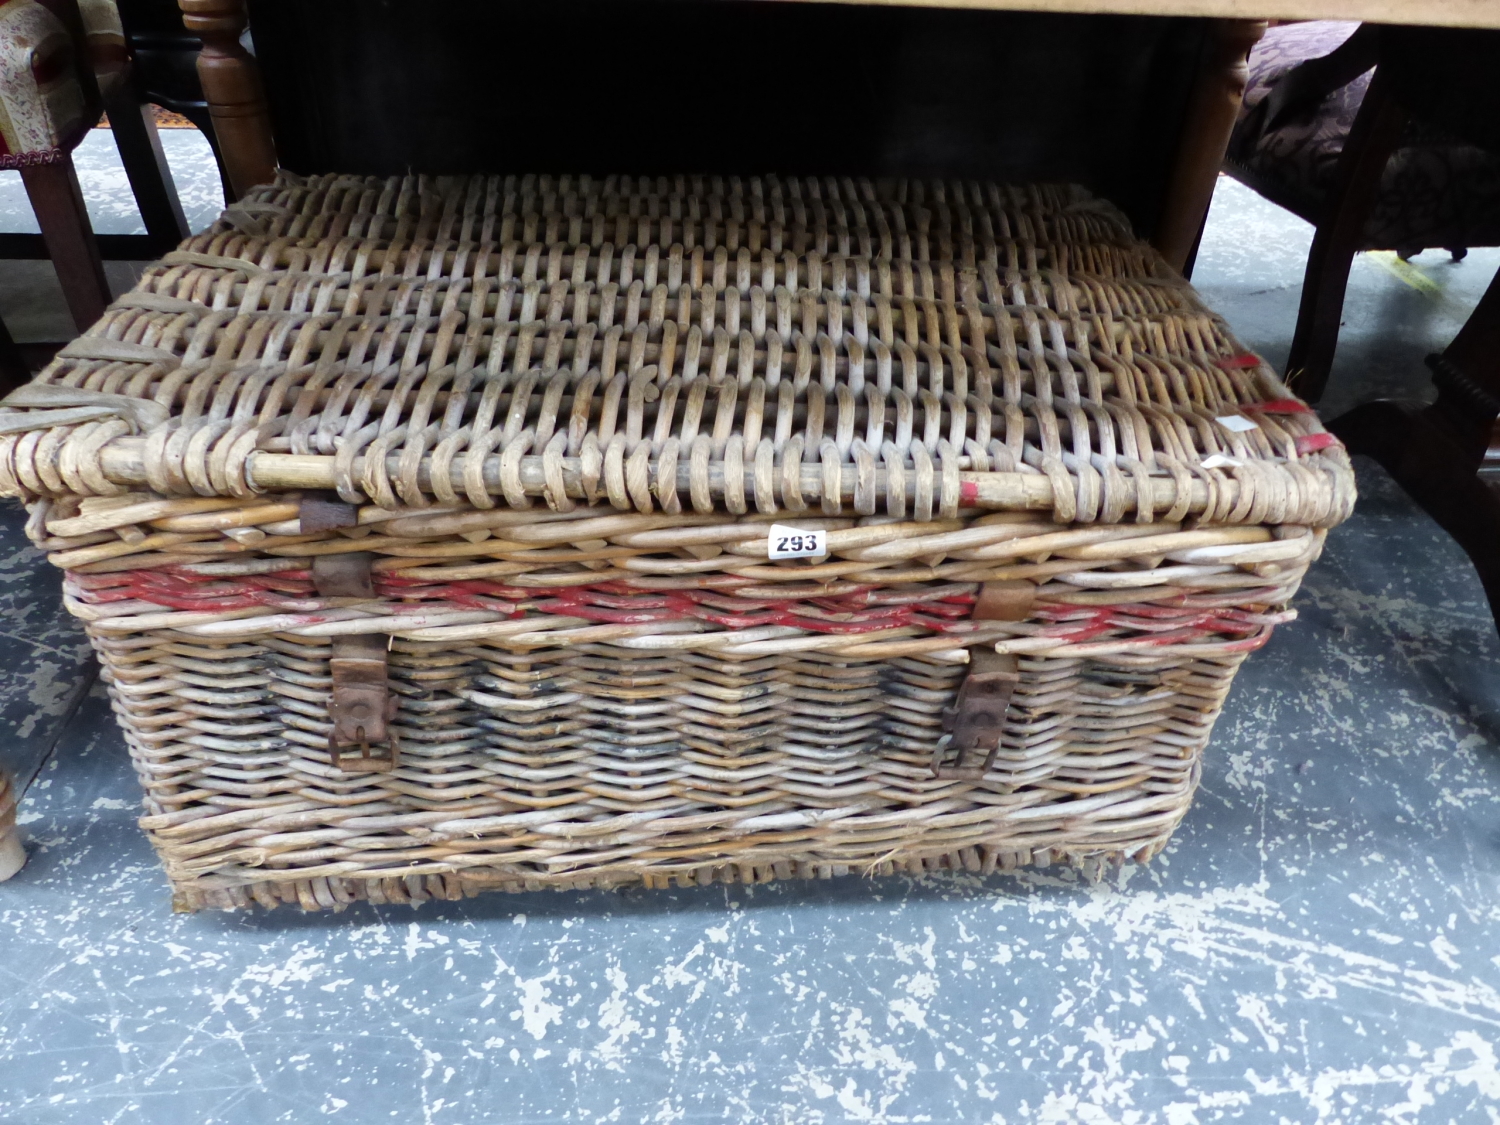 A LARGE WICKER HAMPER AND A SERVANTS BELL.